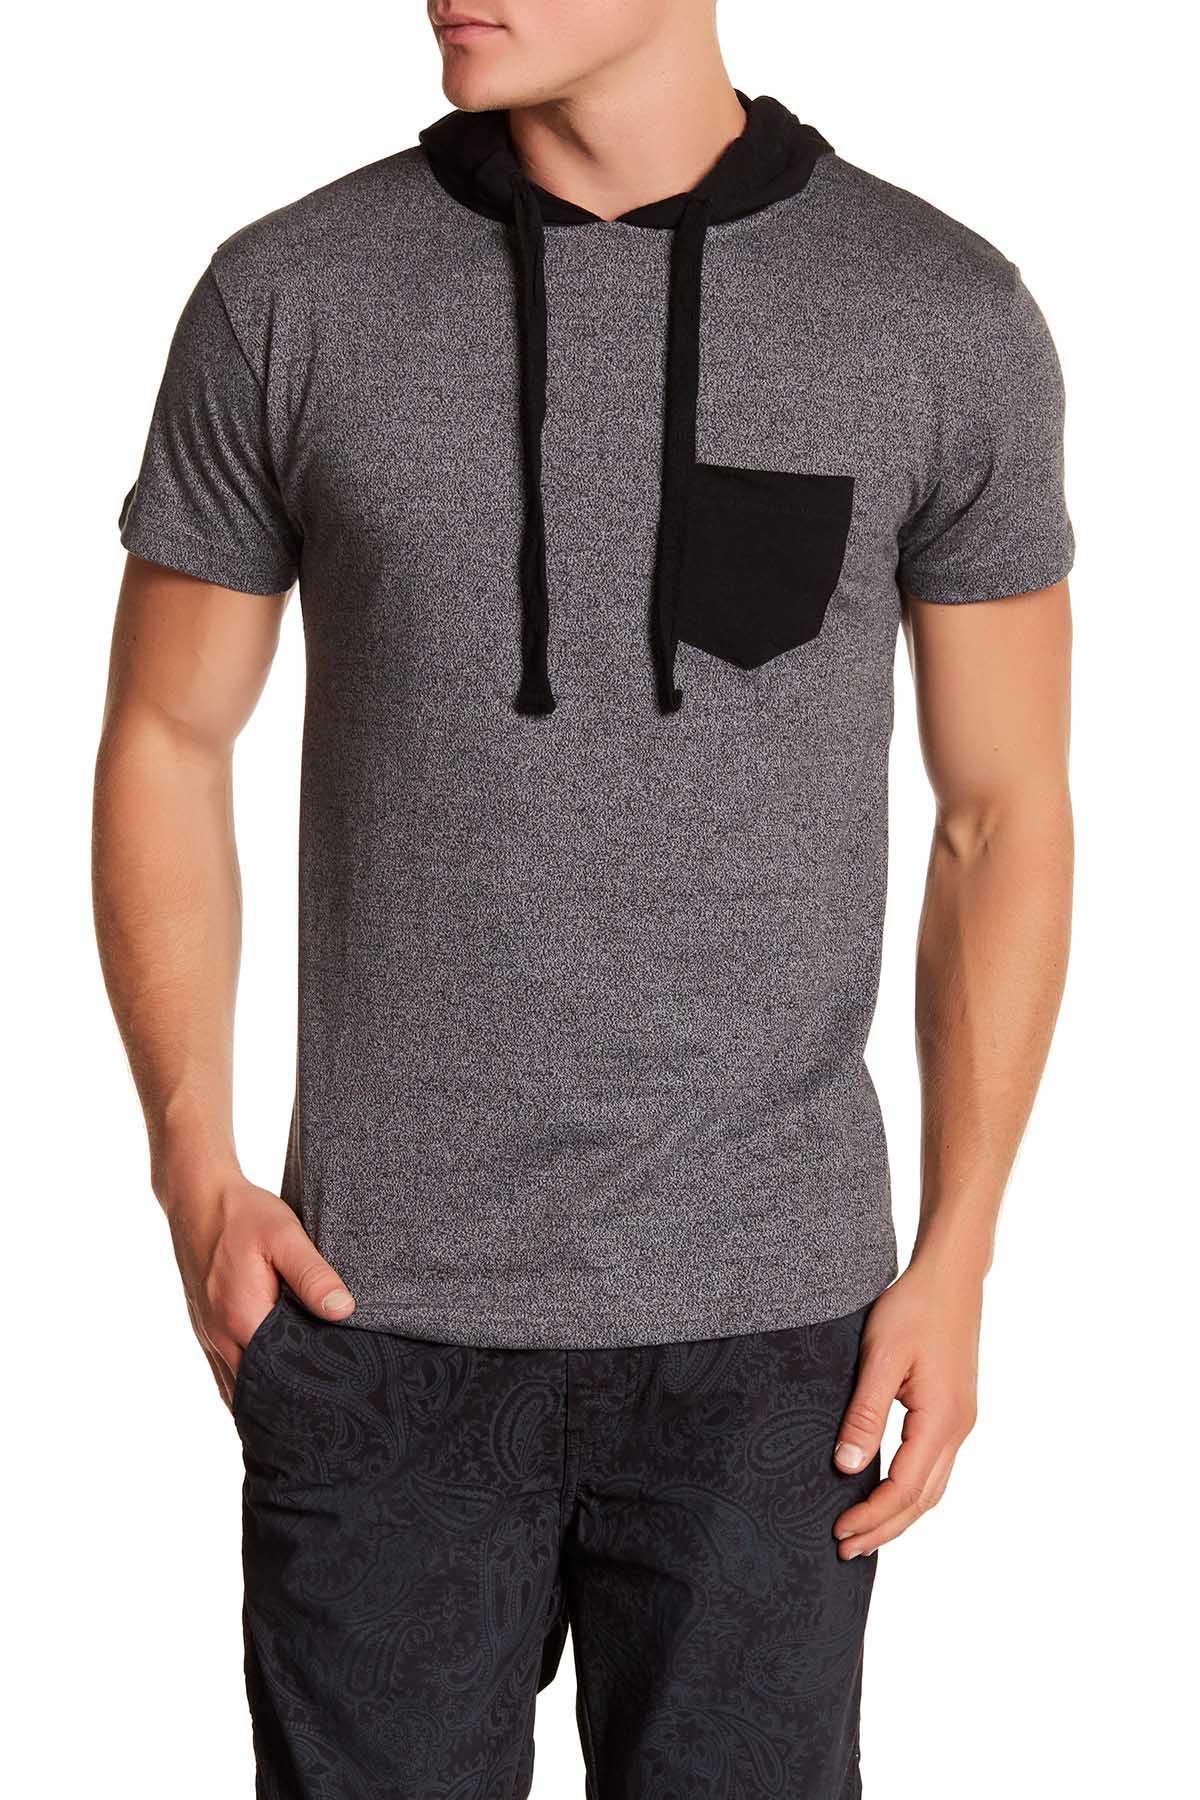 Pop Icon Grey Colby Short Sleeve Hoodie T-Shirt